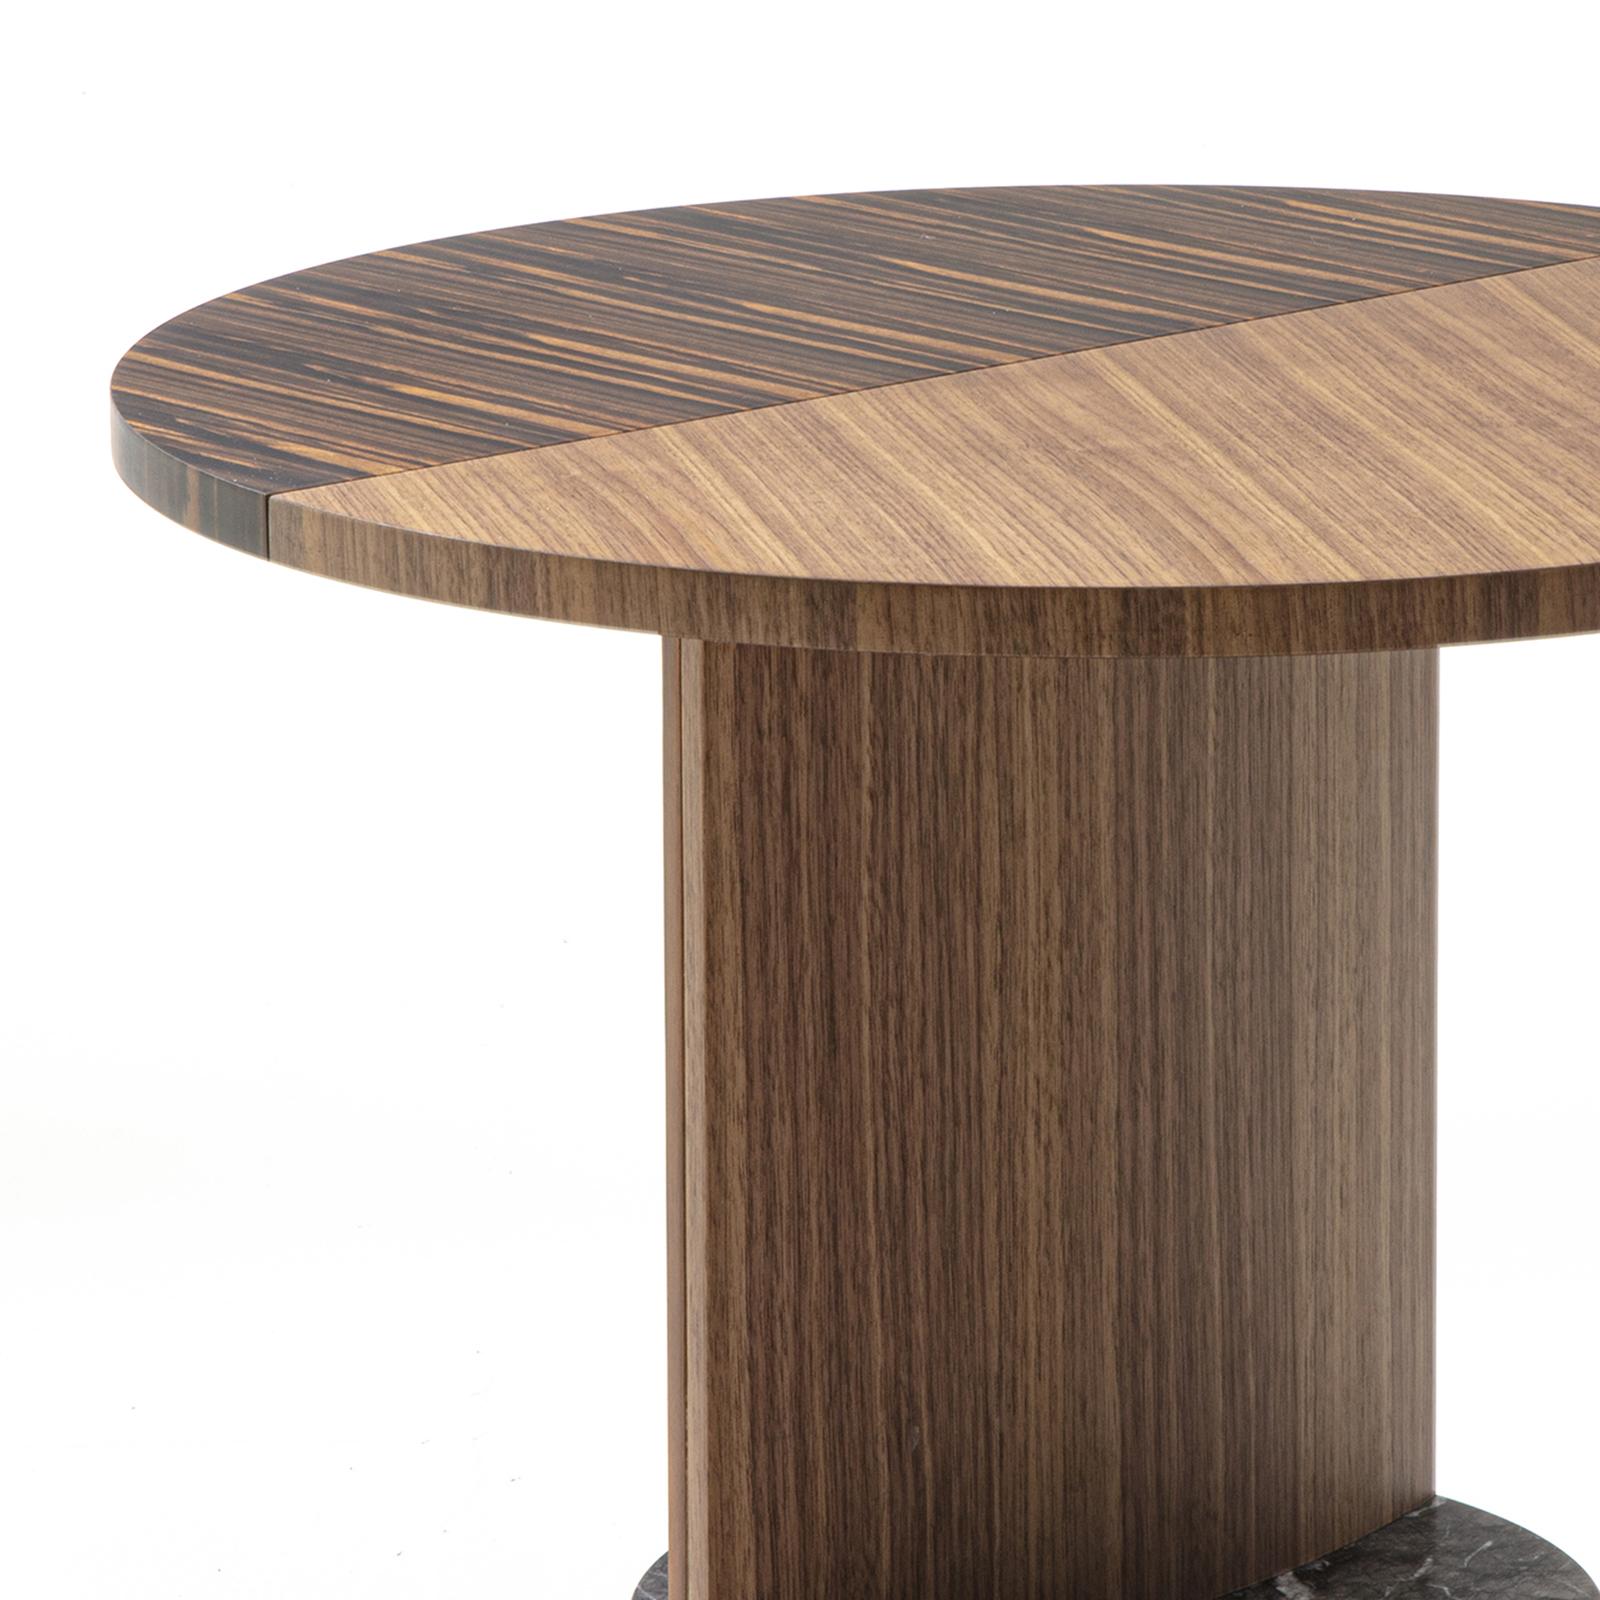 Side table walnut patch large with top made of solid 
walnut wood and solid amara ebony. Foot in solid 
walnut on black marble base.